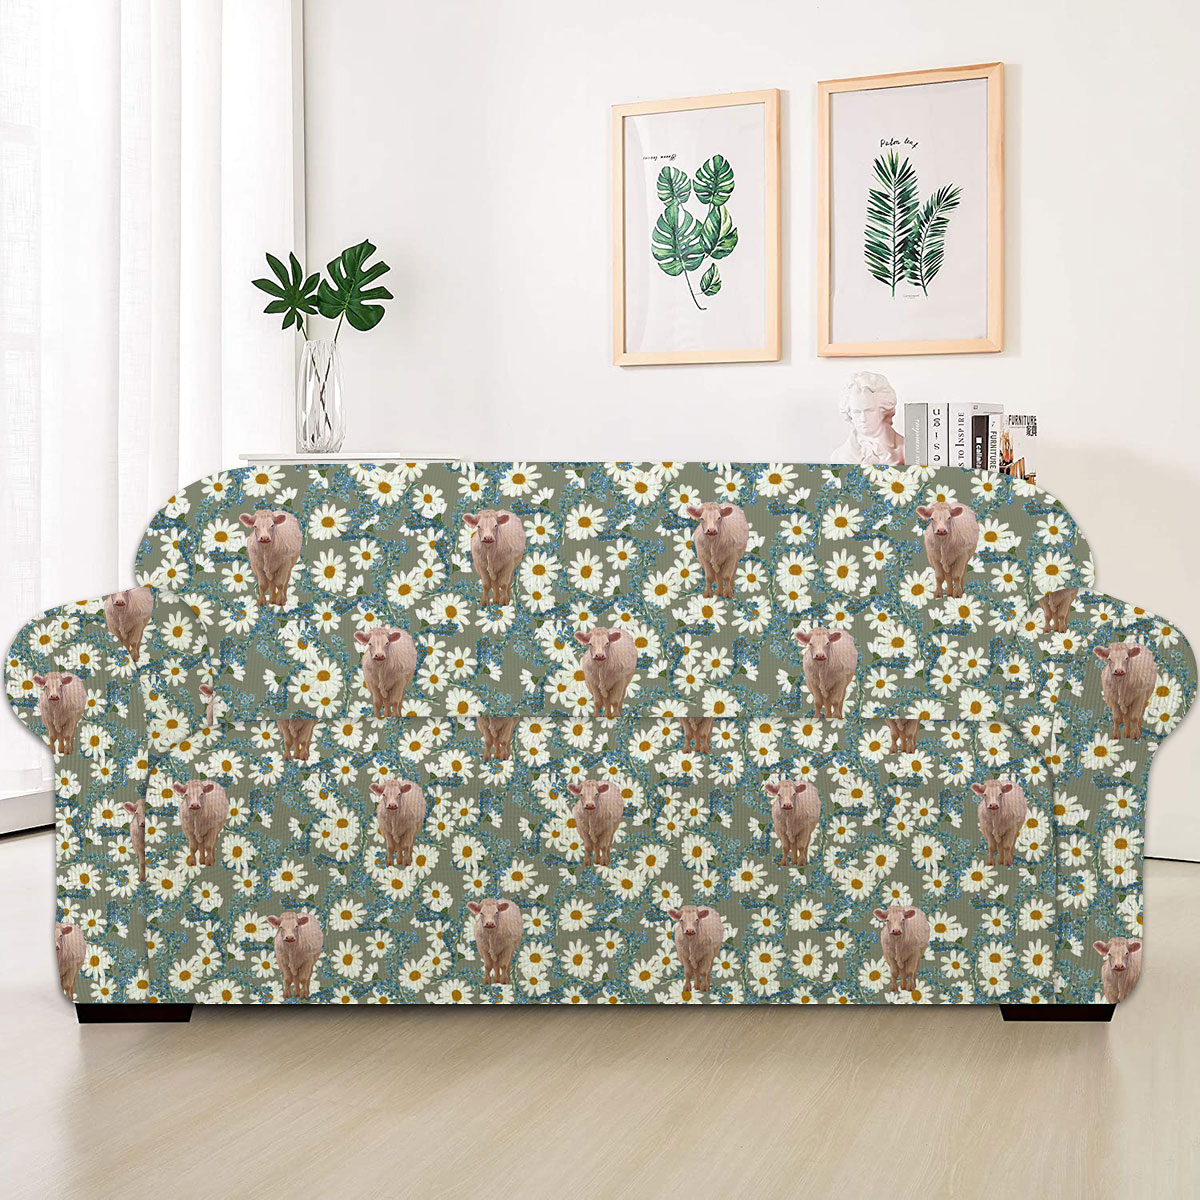 Charolais Camomilles Flower Grey Pattern Sofa Cover